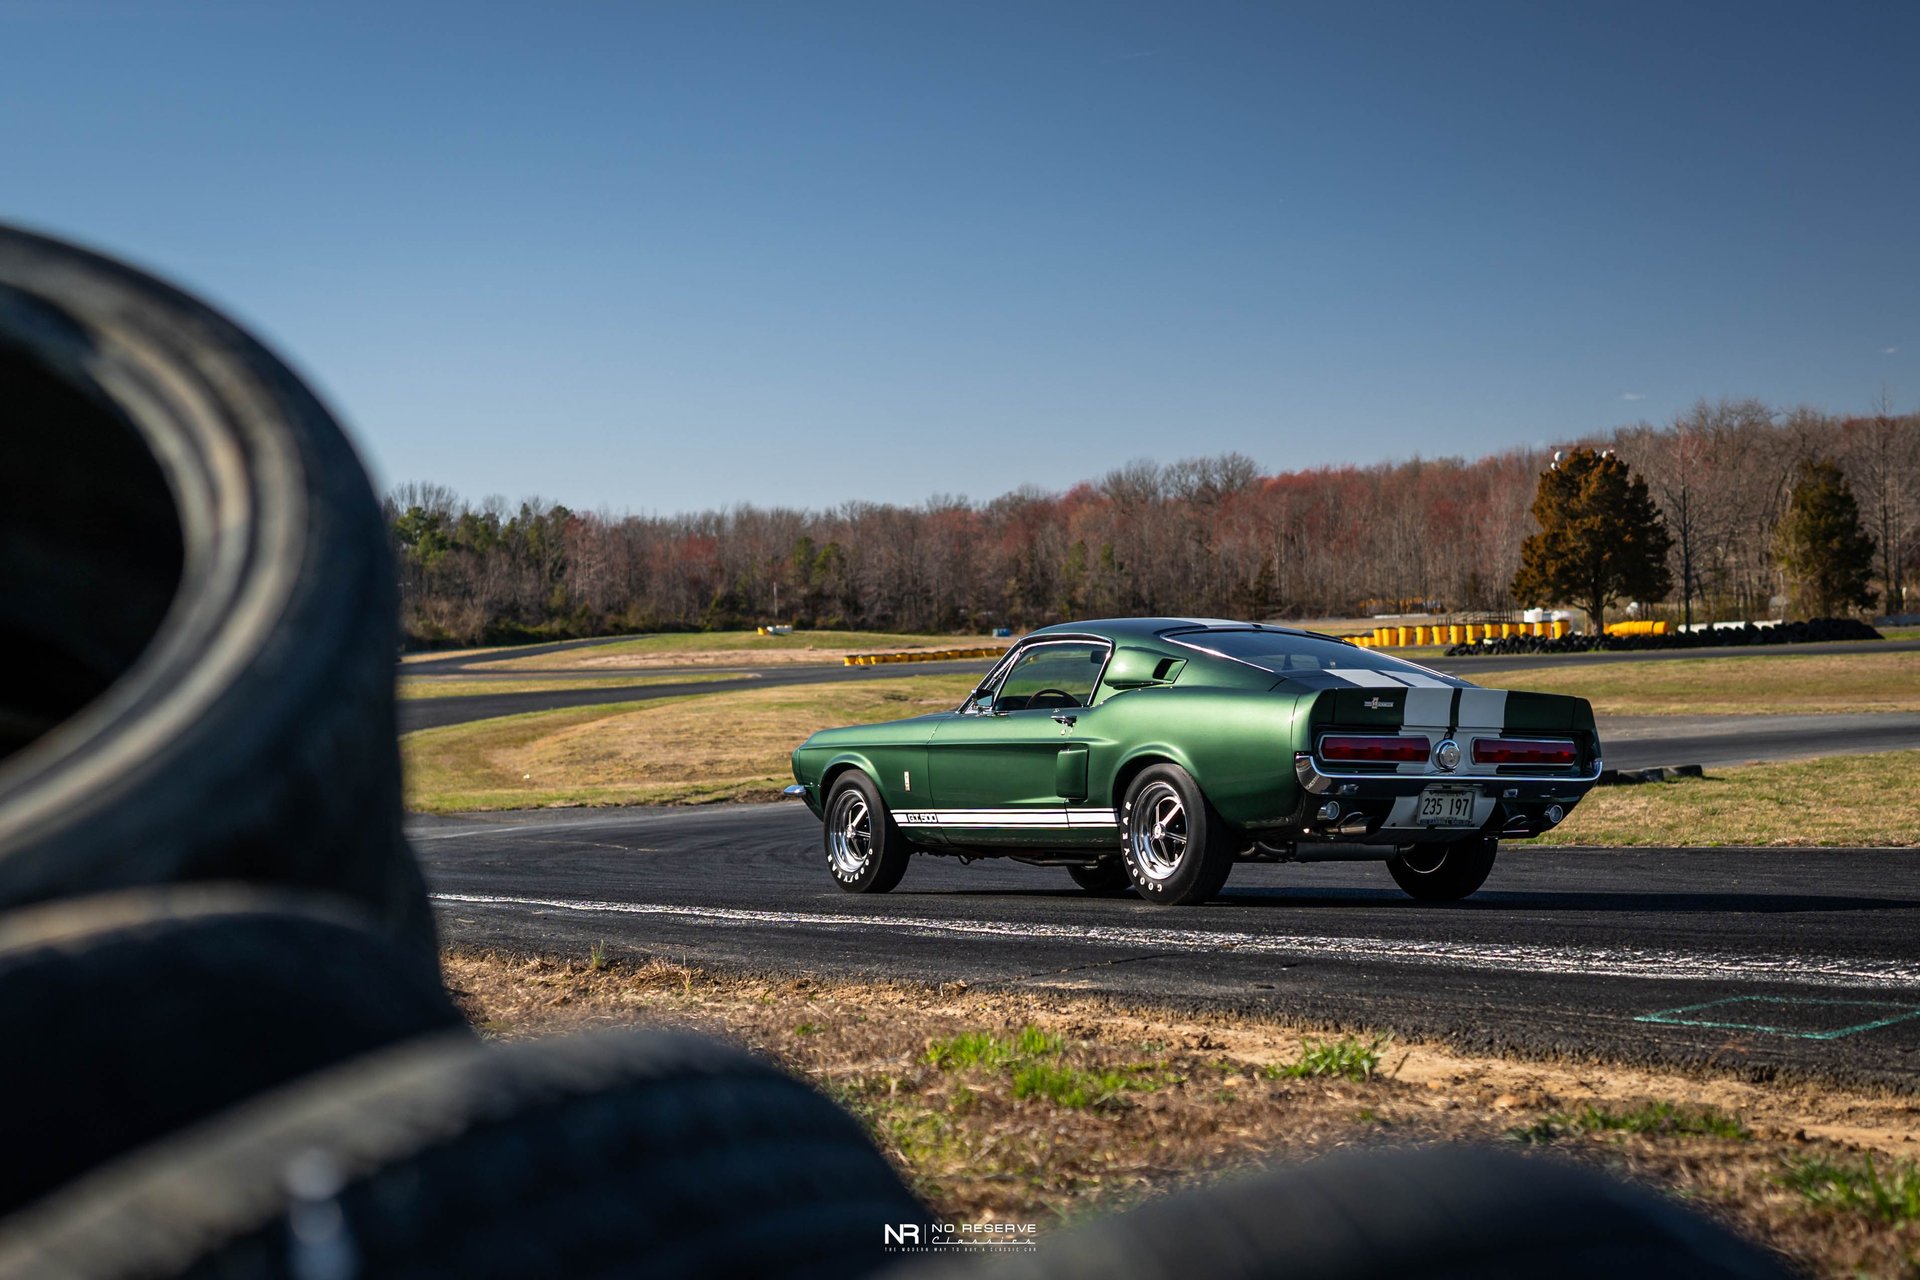 For Sale 1967 Shelby GT500 Fastback #280